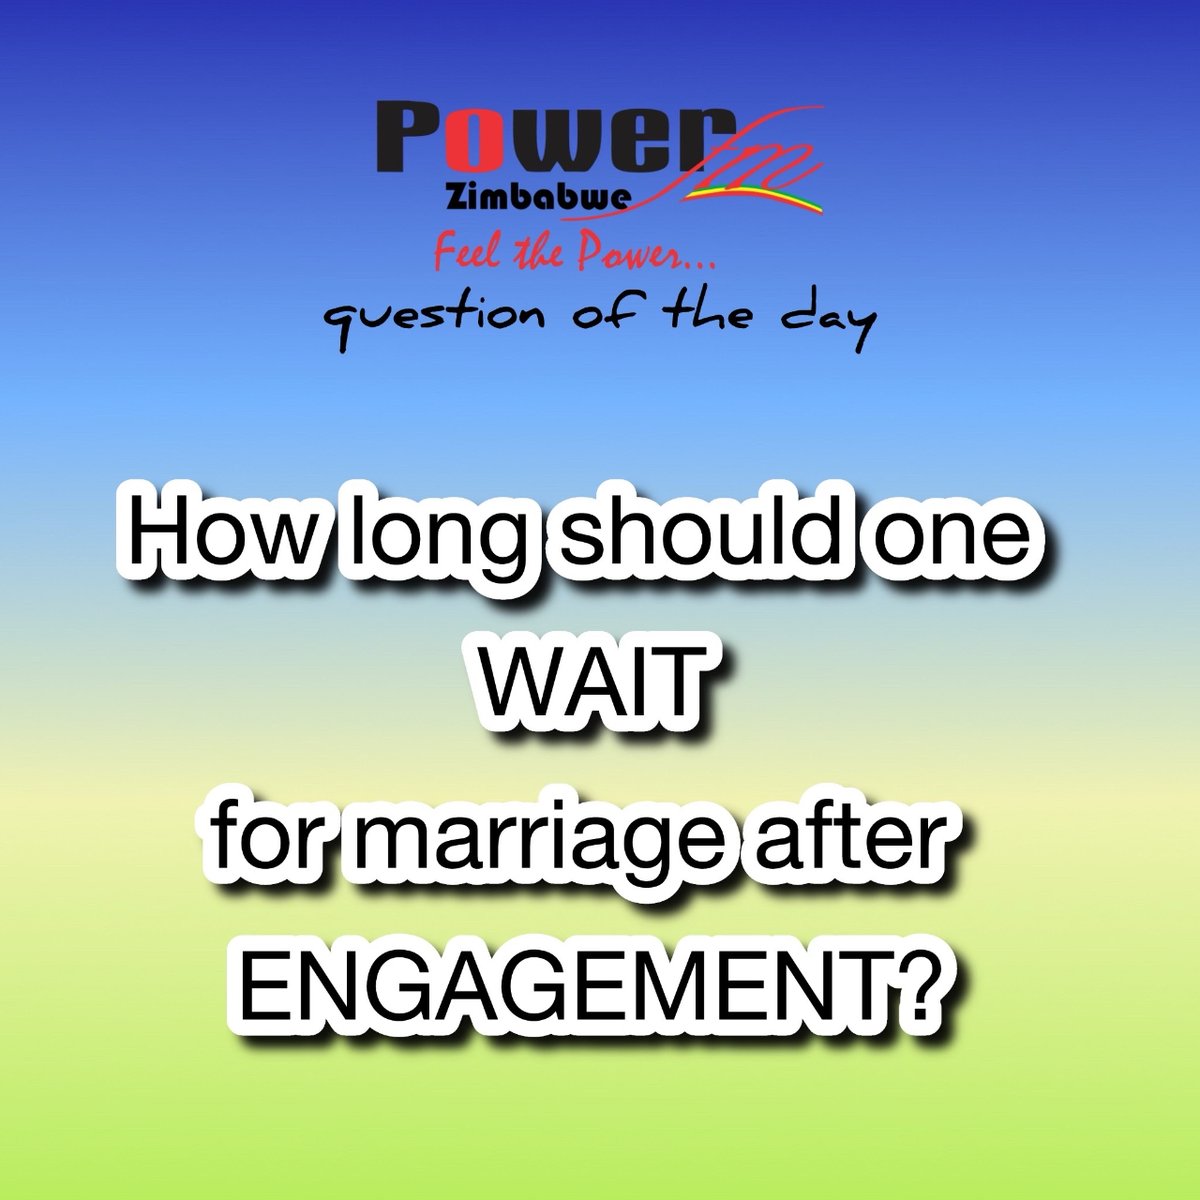 What’s your take on the ideal waiting period between engagement and marriage?